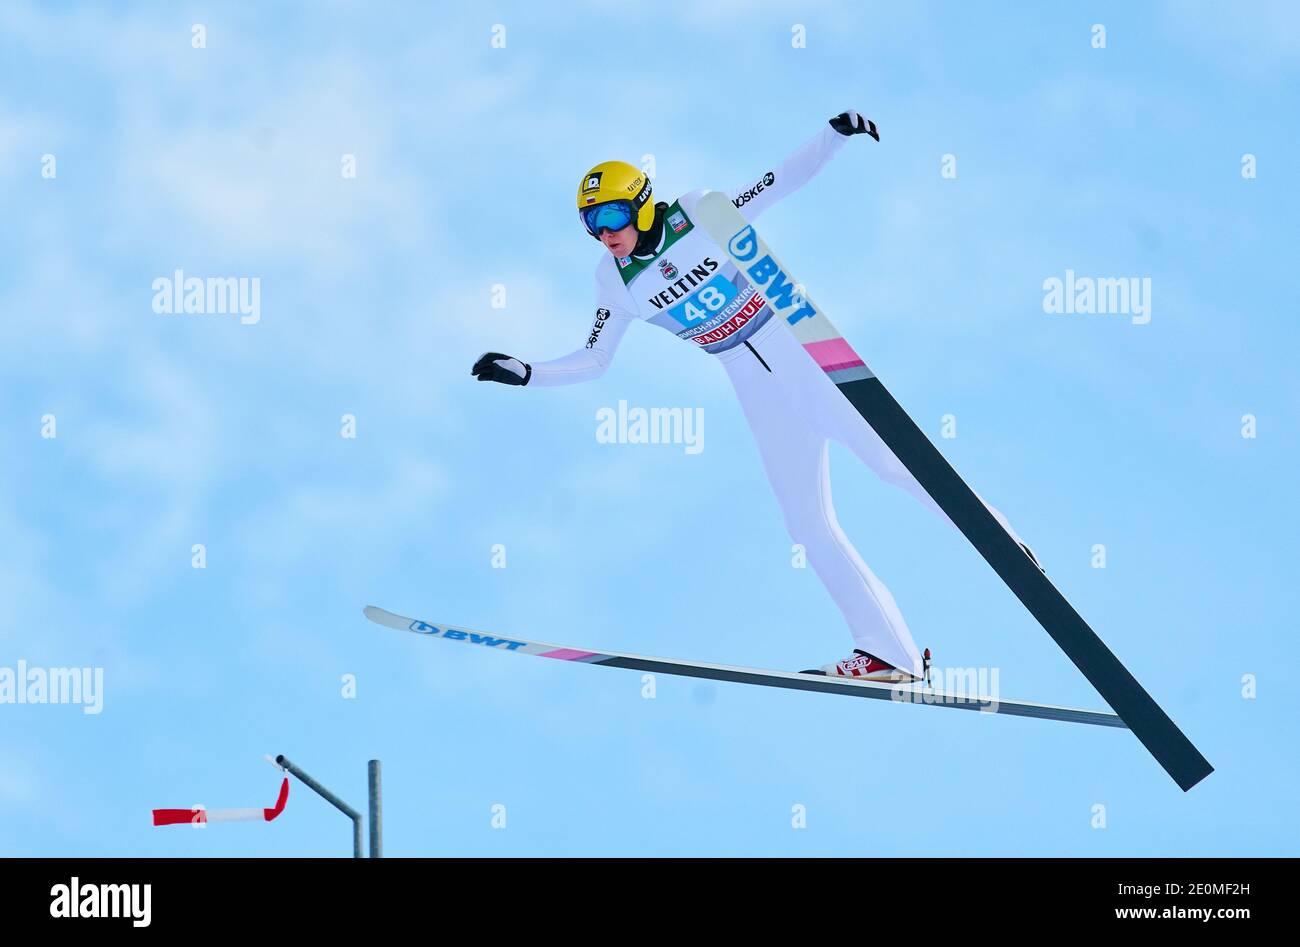 Evgeniy KLIMOV in danger and  in action at the Four Hills Tournament Ski Jumping at Olympic Stadium, Grosse Olympiaschanze in Garmisch-Partenkirchen, Bavaria, Germany, January 01, 2021.  © Peter Schatz / Alamy Live News Stock Photo